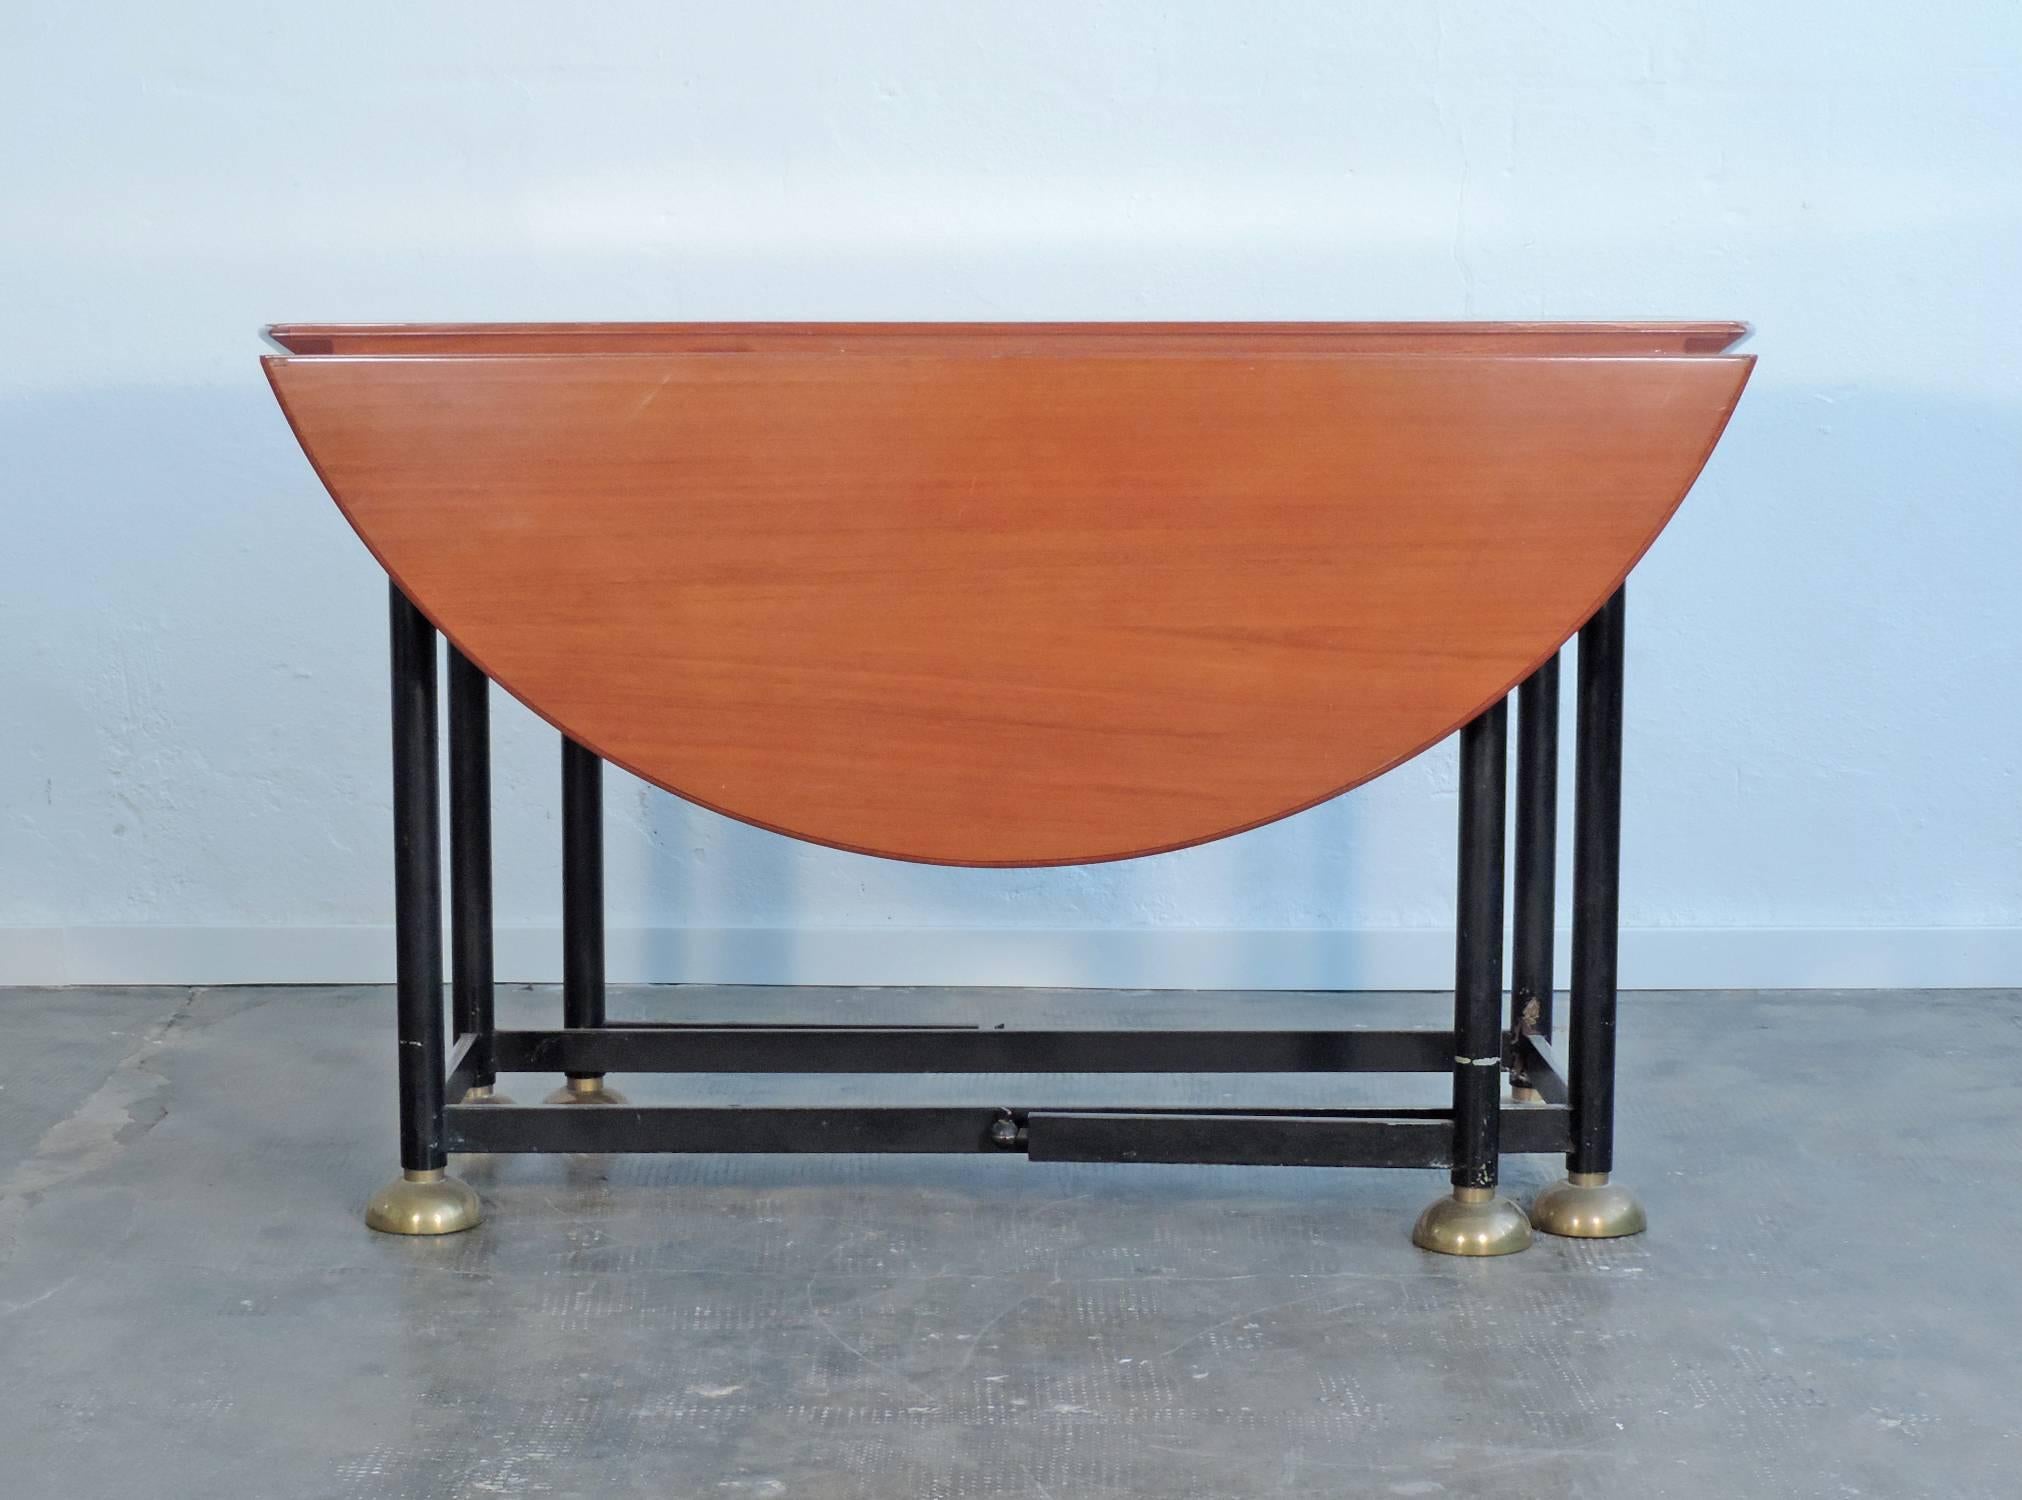 Architectural Italian 20th century folding circular dining table.

Measures: 129.5 x 57.5 cm with wings closed.